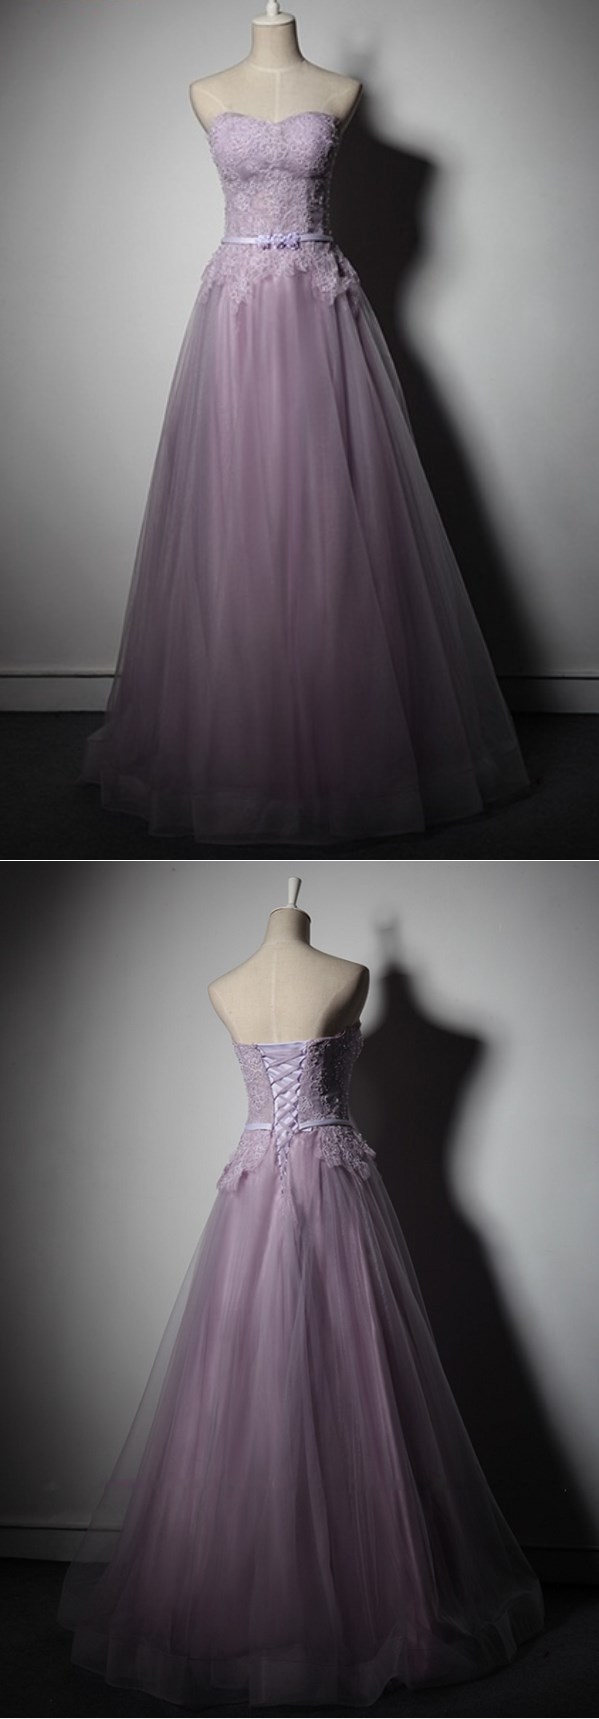 Light Purple Prom Dress Tulle Party Formal Graduation Dress Evening Gown